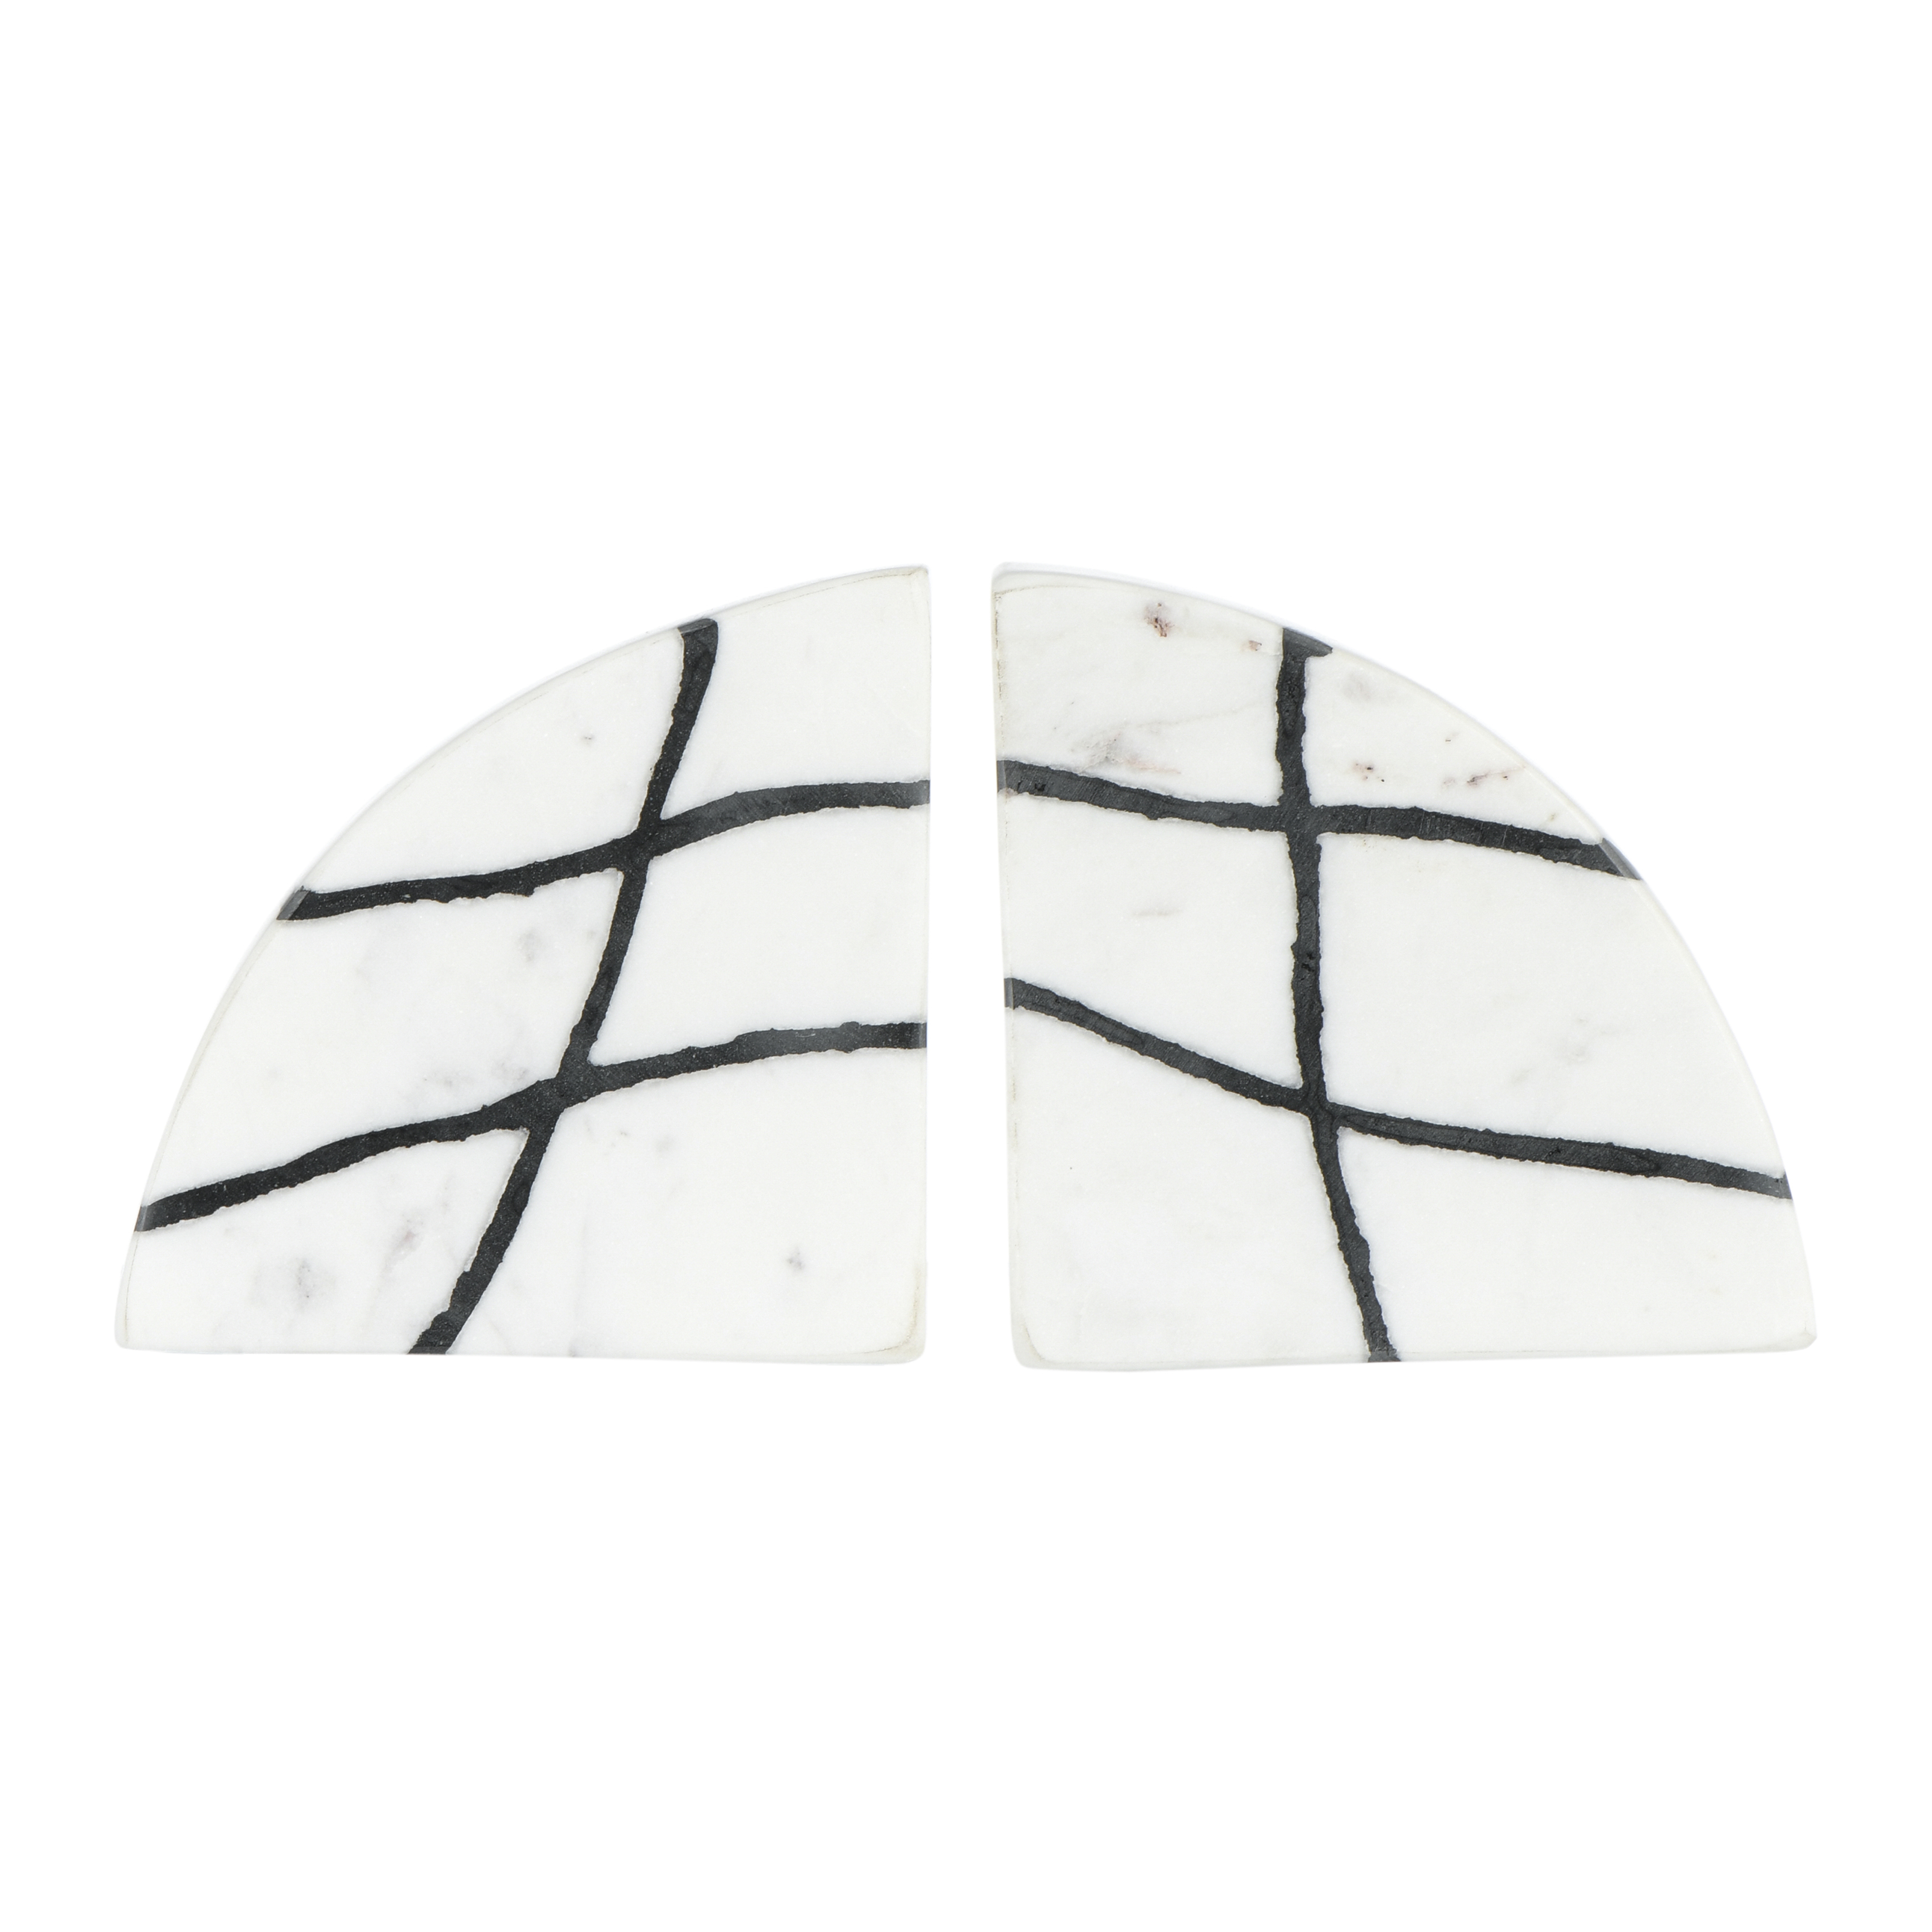 White & Black Marble Bookends, Set of 2 - Moss & Wilder